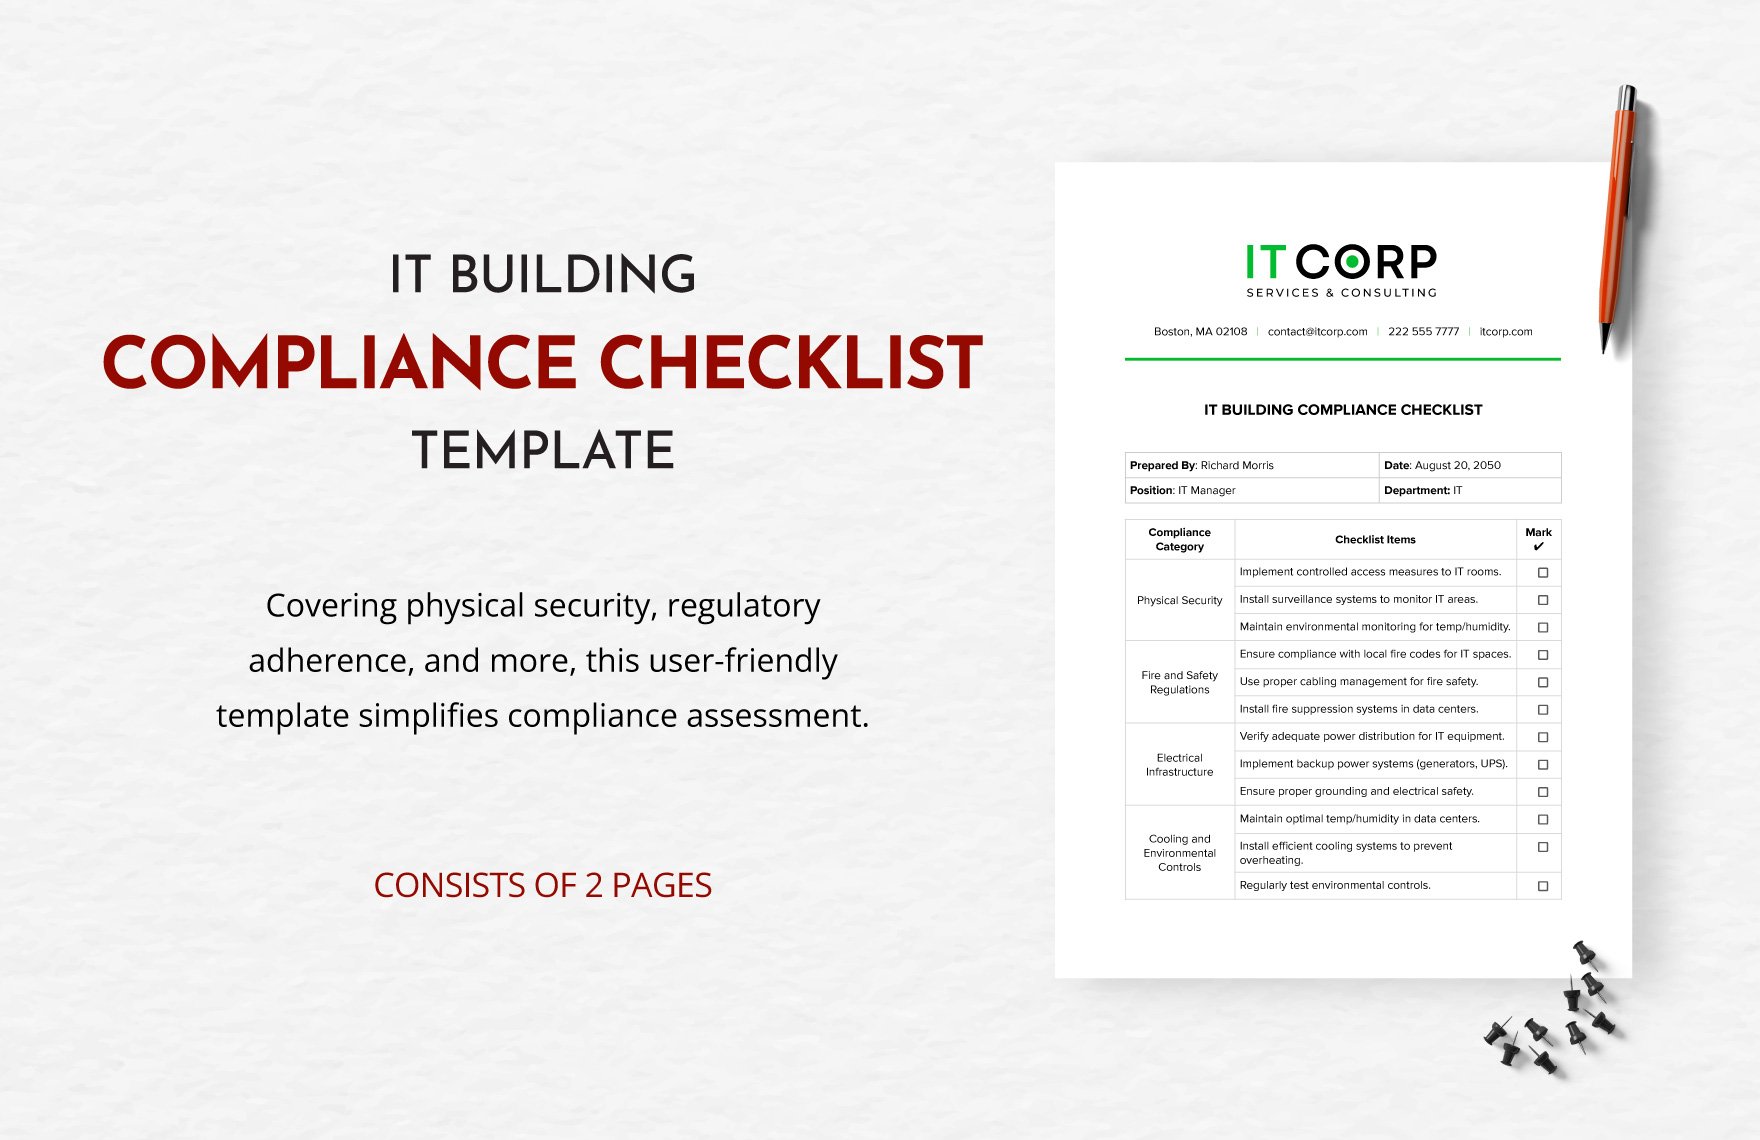 IT Building Compliance Checklist Template in Word, Google Docs, PDF